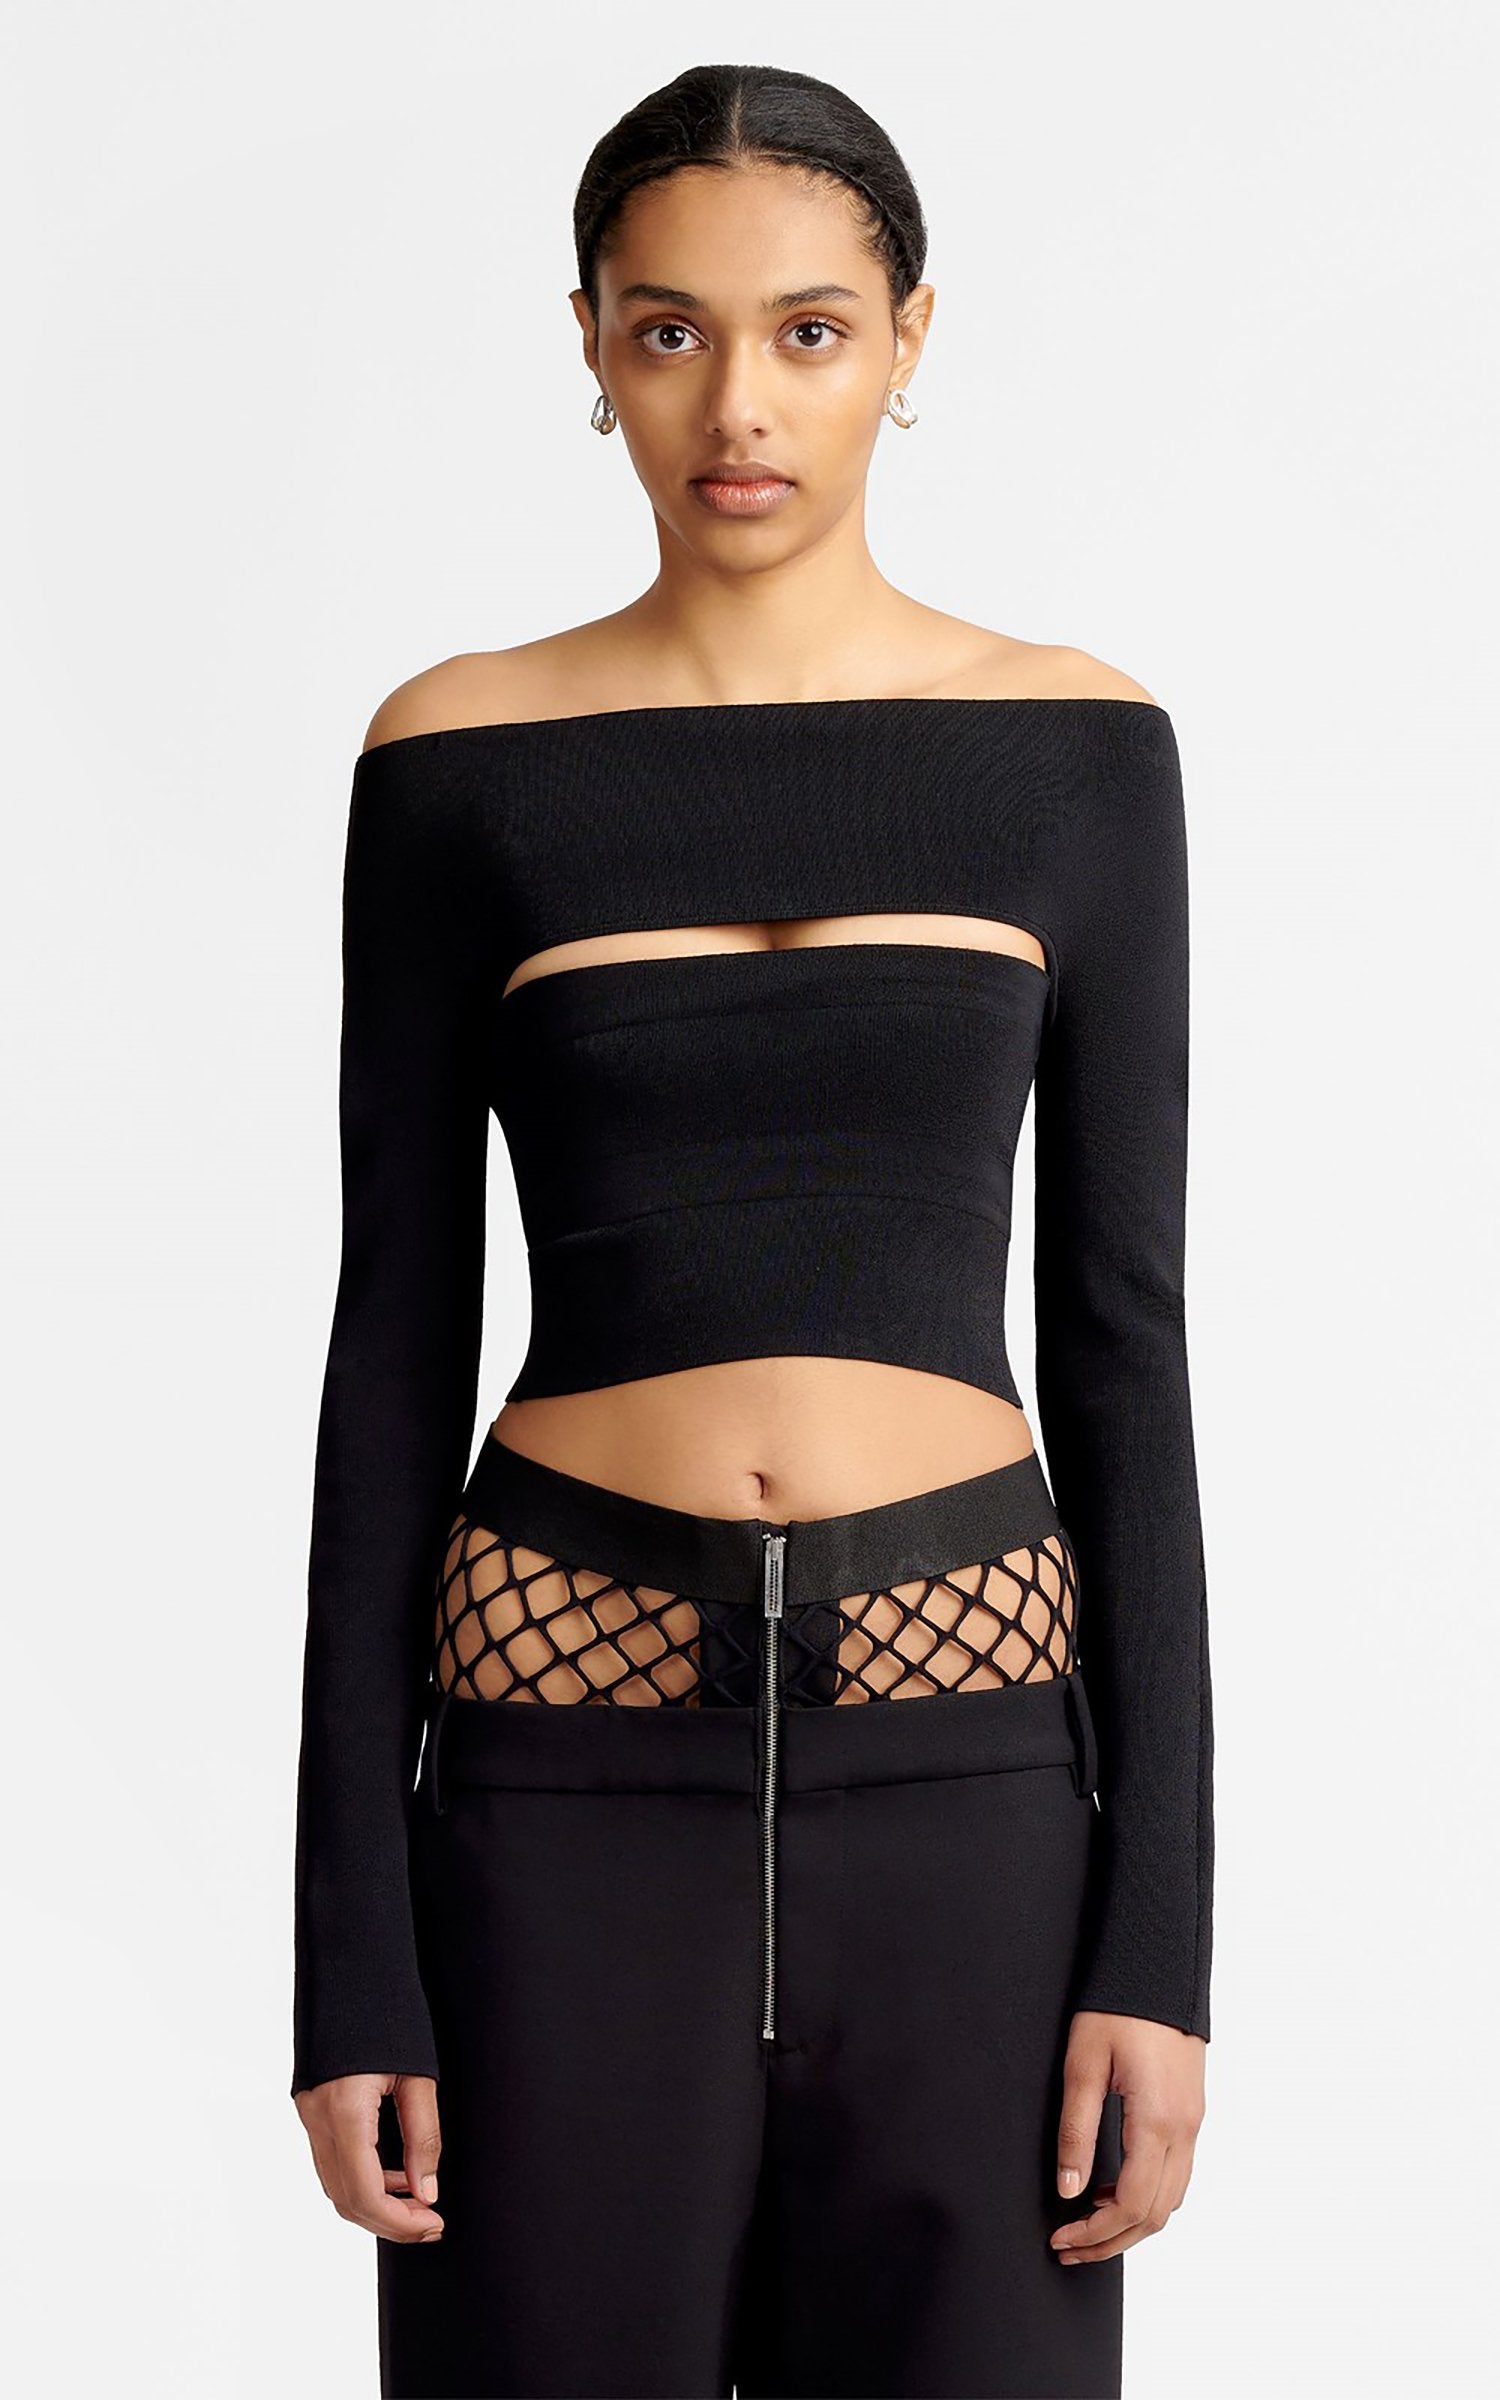 Two Piece Tube Top Black